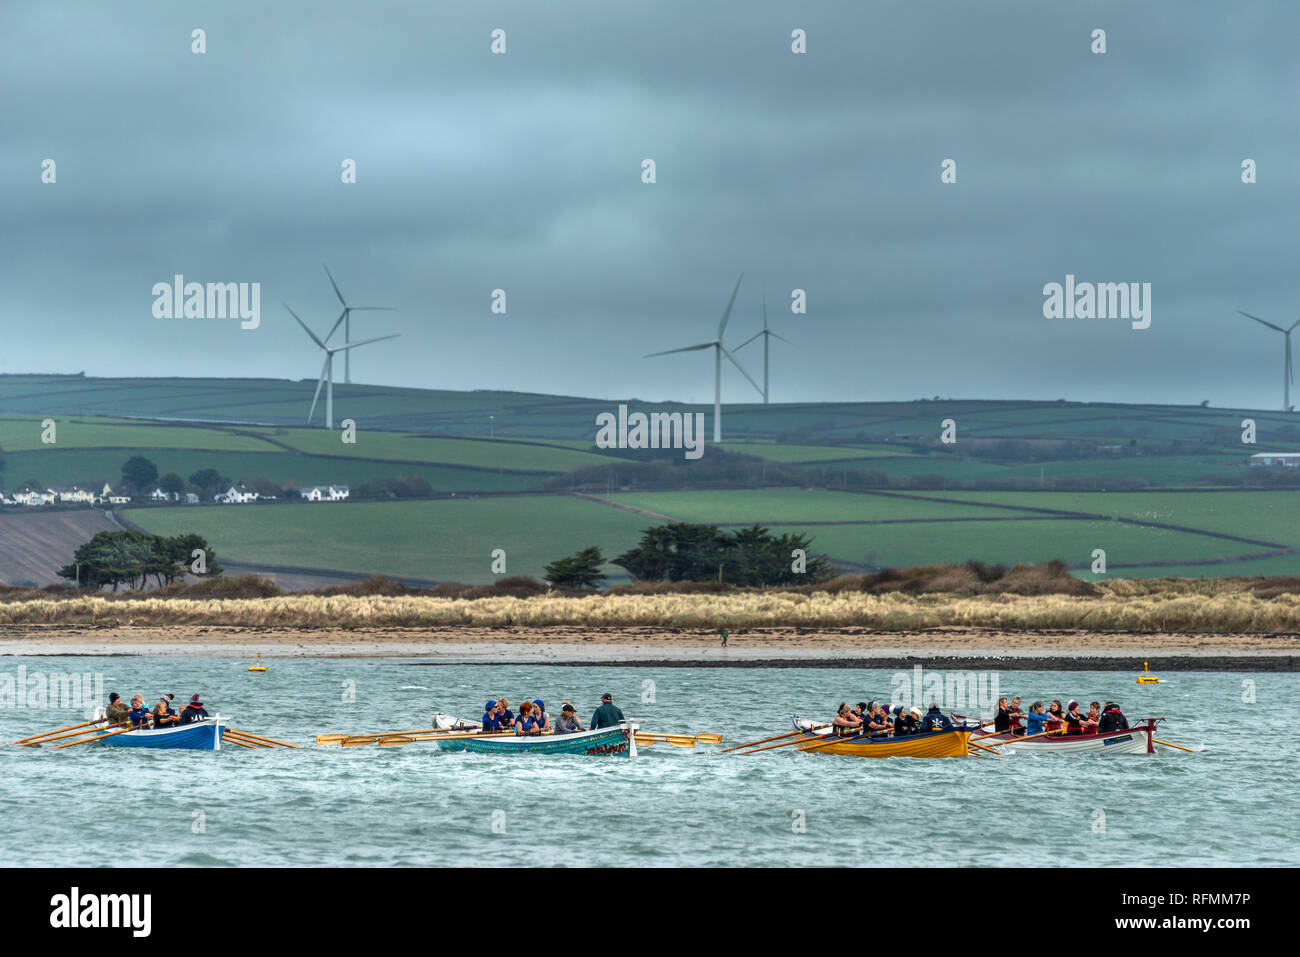 UK Weather - Saturday 26th January. On a cold overcast day in North Devon, Pilot Gig Boats gather at the quayside in the village of Appledore to do ba Stock Photo